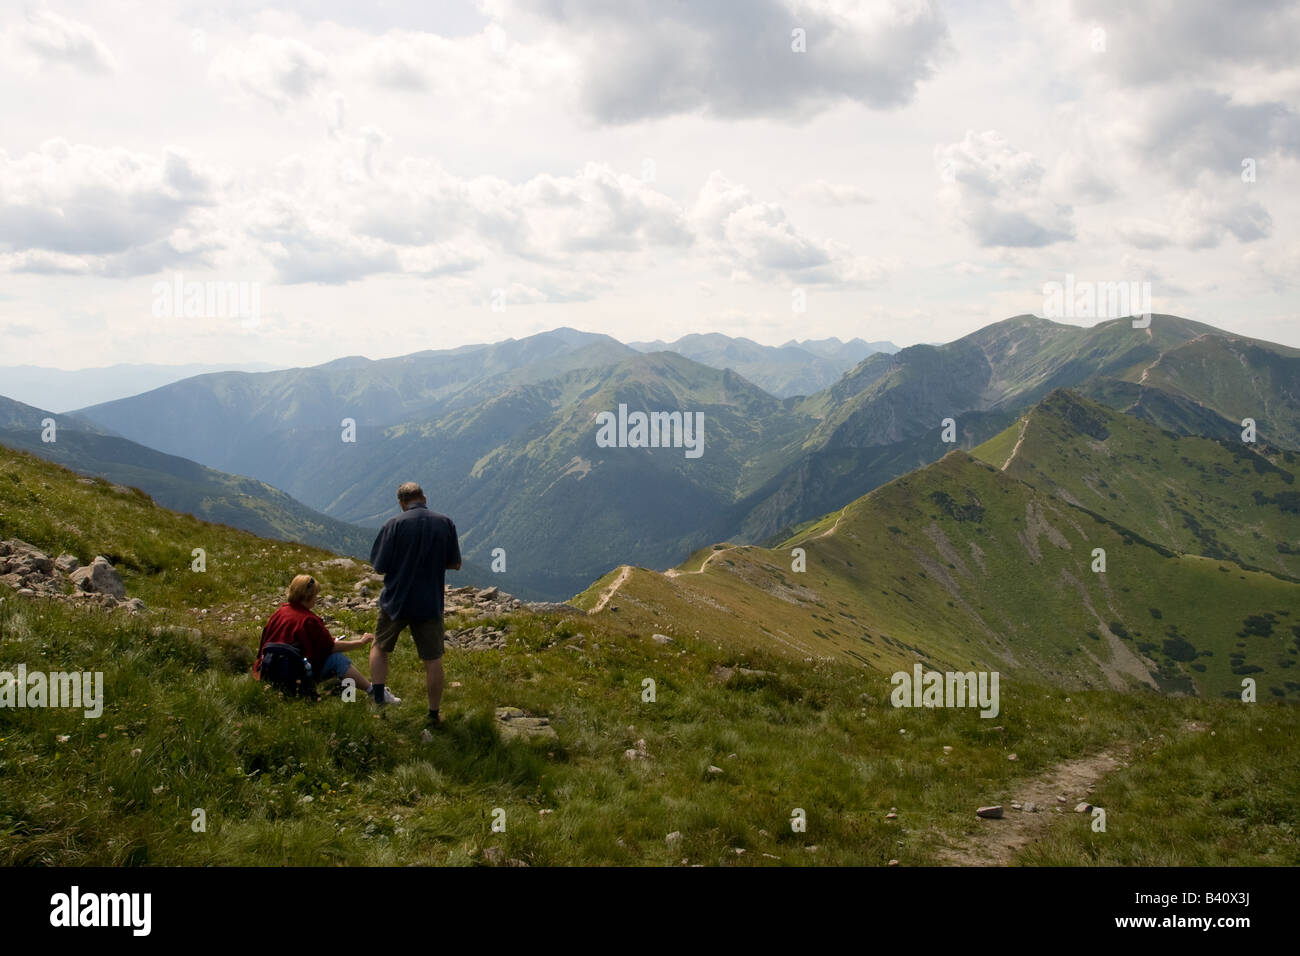 Two men admire the view from the top of the mountain Kasprowy Wierch, located in the Western Tatras mountains of Zakopane Poland Stock Photo